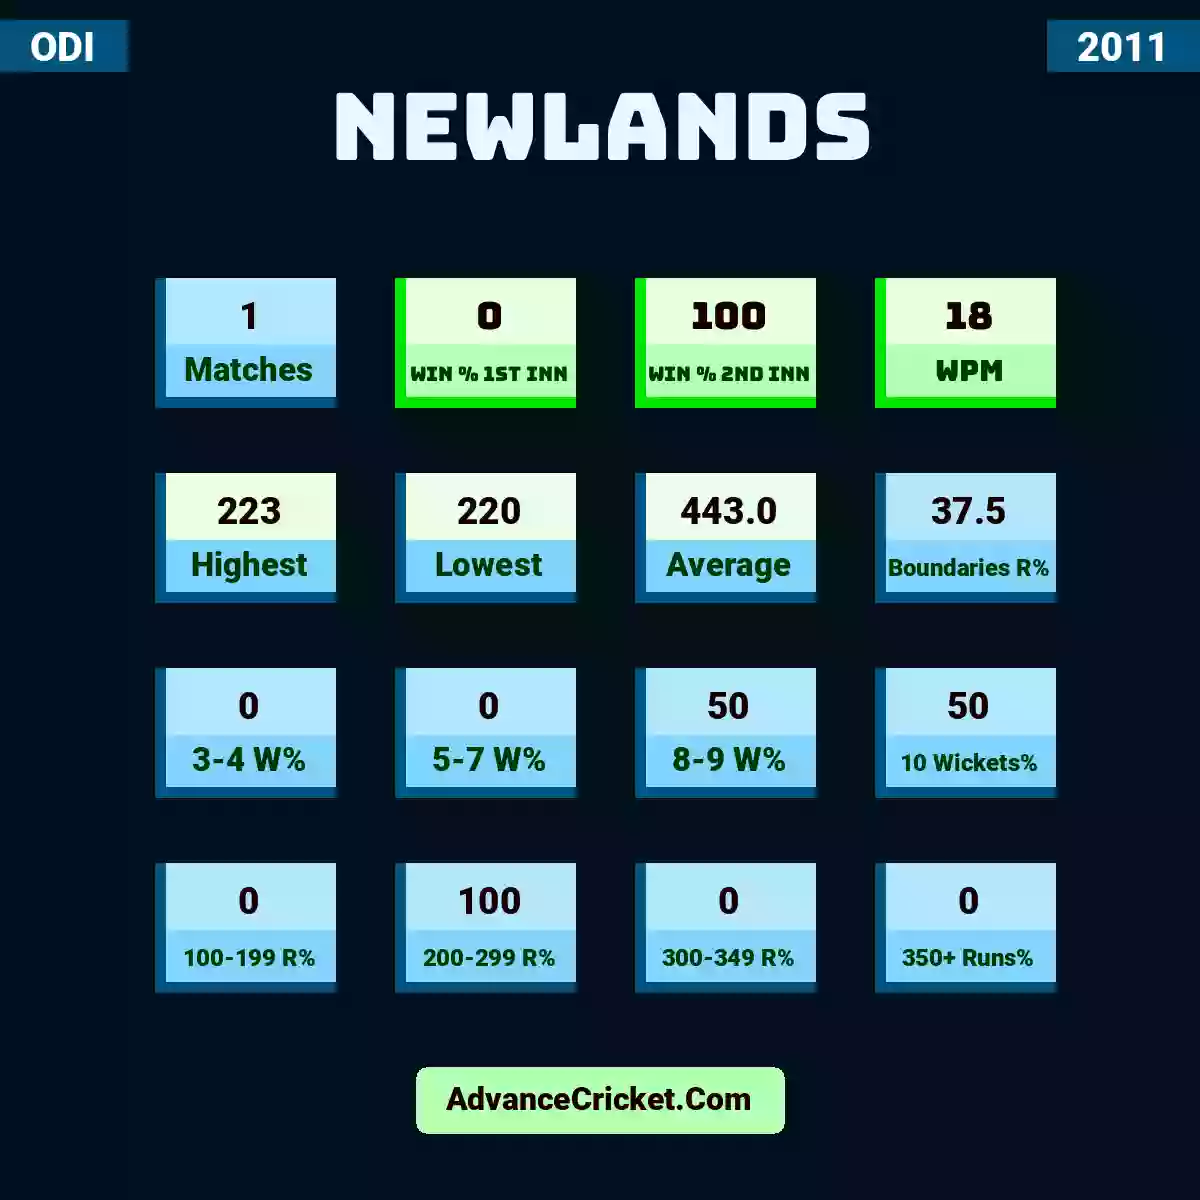 Image showing Newlands with Matches: 1, Win % 1st Inn: 0, Win % 2nd Inn: 100, WPM: 18, Highest: 223, Lowest: 220, Average: 443.0, Boundaries R%: 37.5, 3-4 W%: 0, 5-7 W%: 0, 8-9 W%: 50, 10 Wickets%: 50, 100-199 R%: 0, 200-299 R%: 100, 300-349 R%: 0, 350+ Runs%: 0.